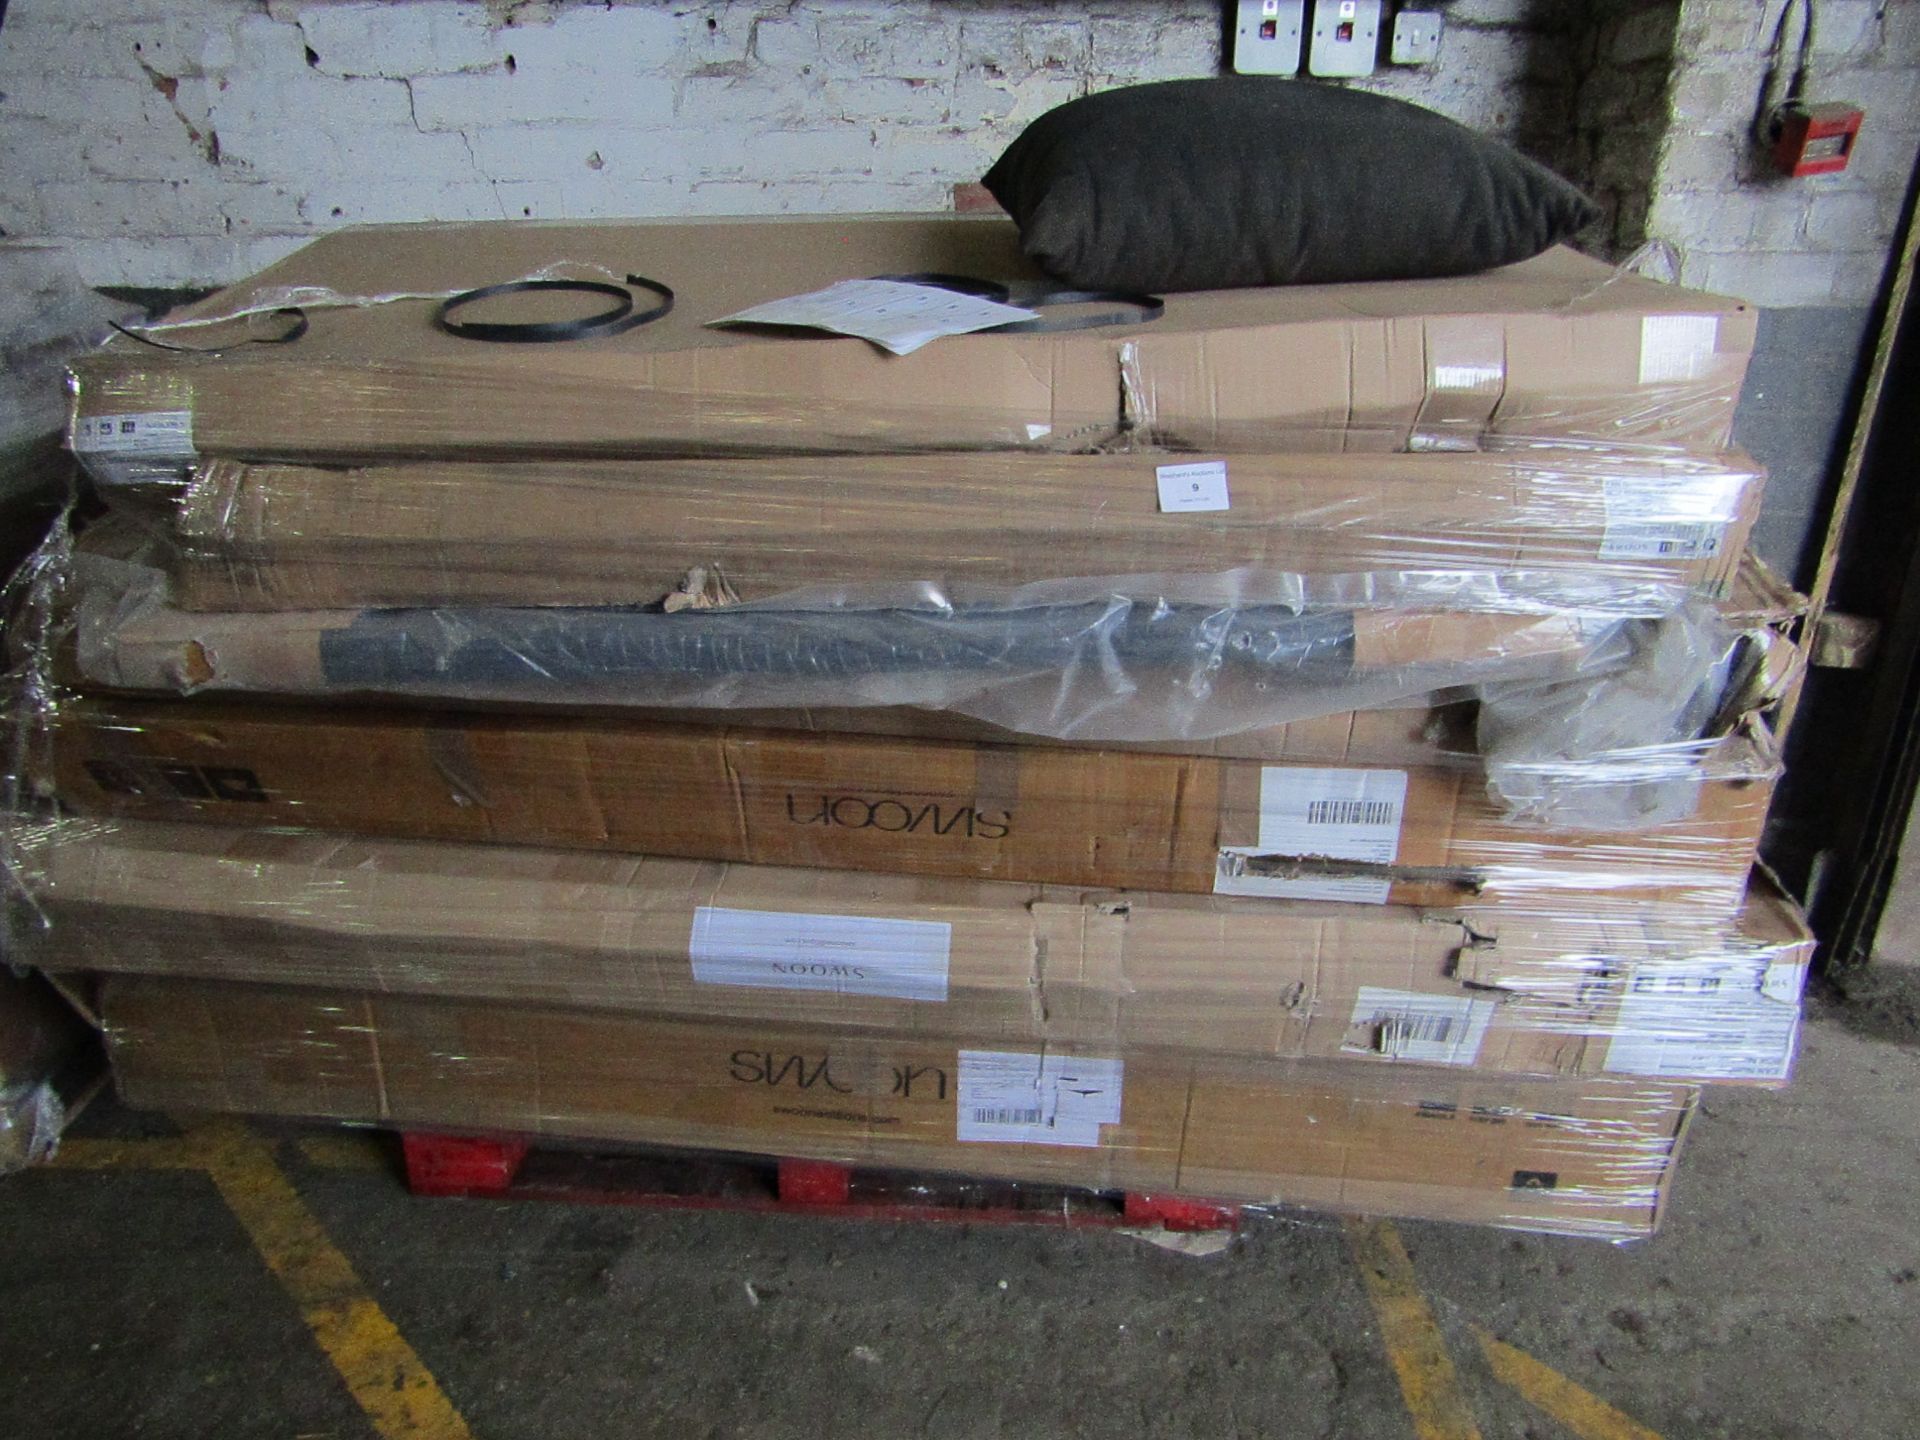 | 1X | PALLET OF SWOON BED PARTS, UNSURE IF ANY MATCH OR MAKE COMPLETE BEDS |